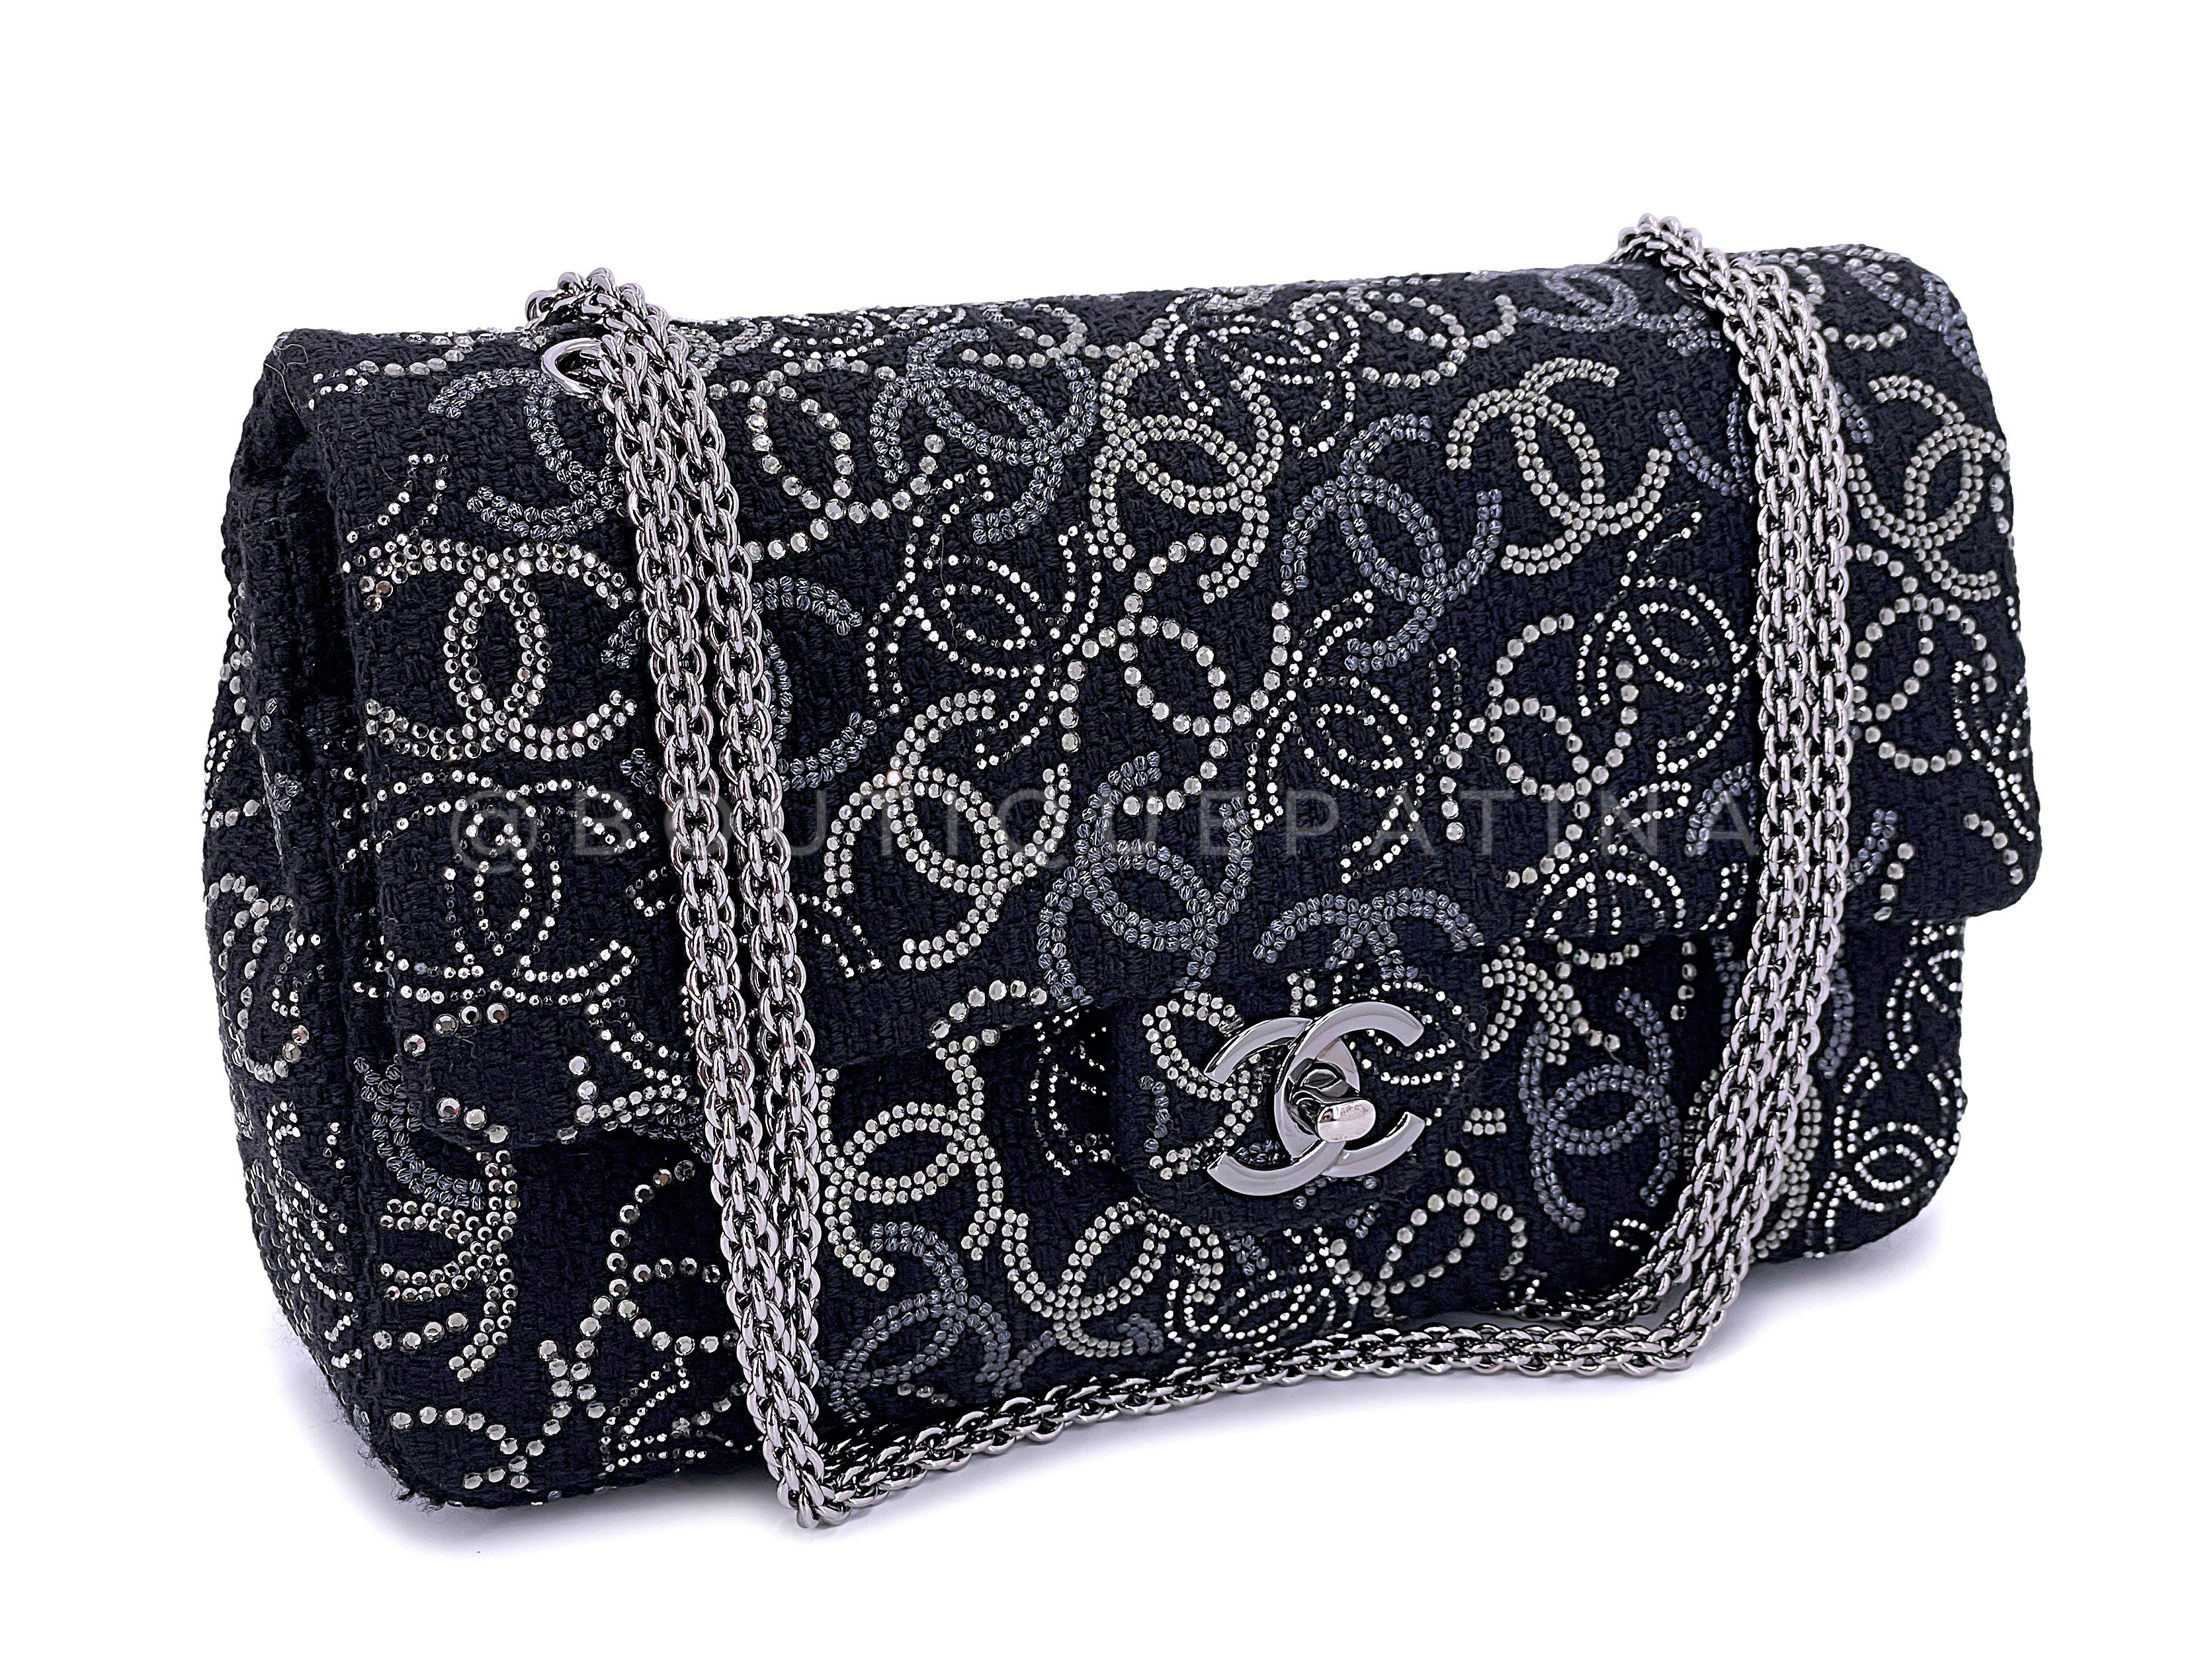 Store item: 67299
Intricately finely-spun black tweed yarn, etched metal studs and strass crystals make this beautiful Chanel 2010 Black Paris-Shanghai Pudong Medium Classic Double Flap Bag.

As seen in the 2010 Paris-Shanghai collection, this bag